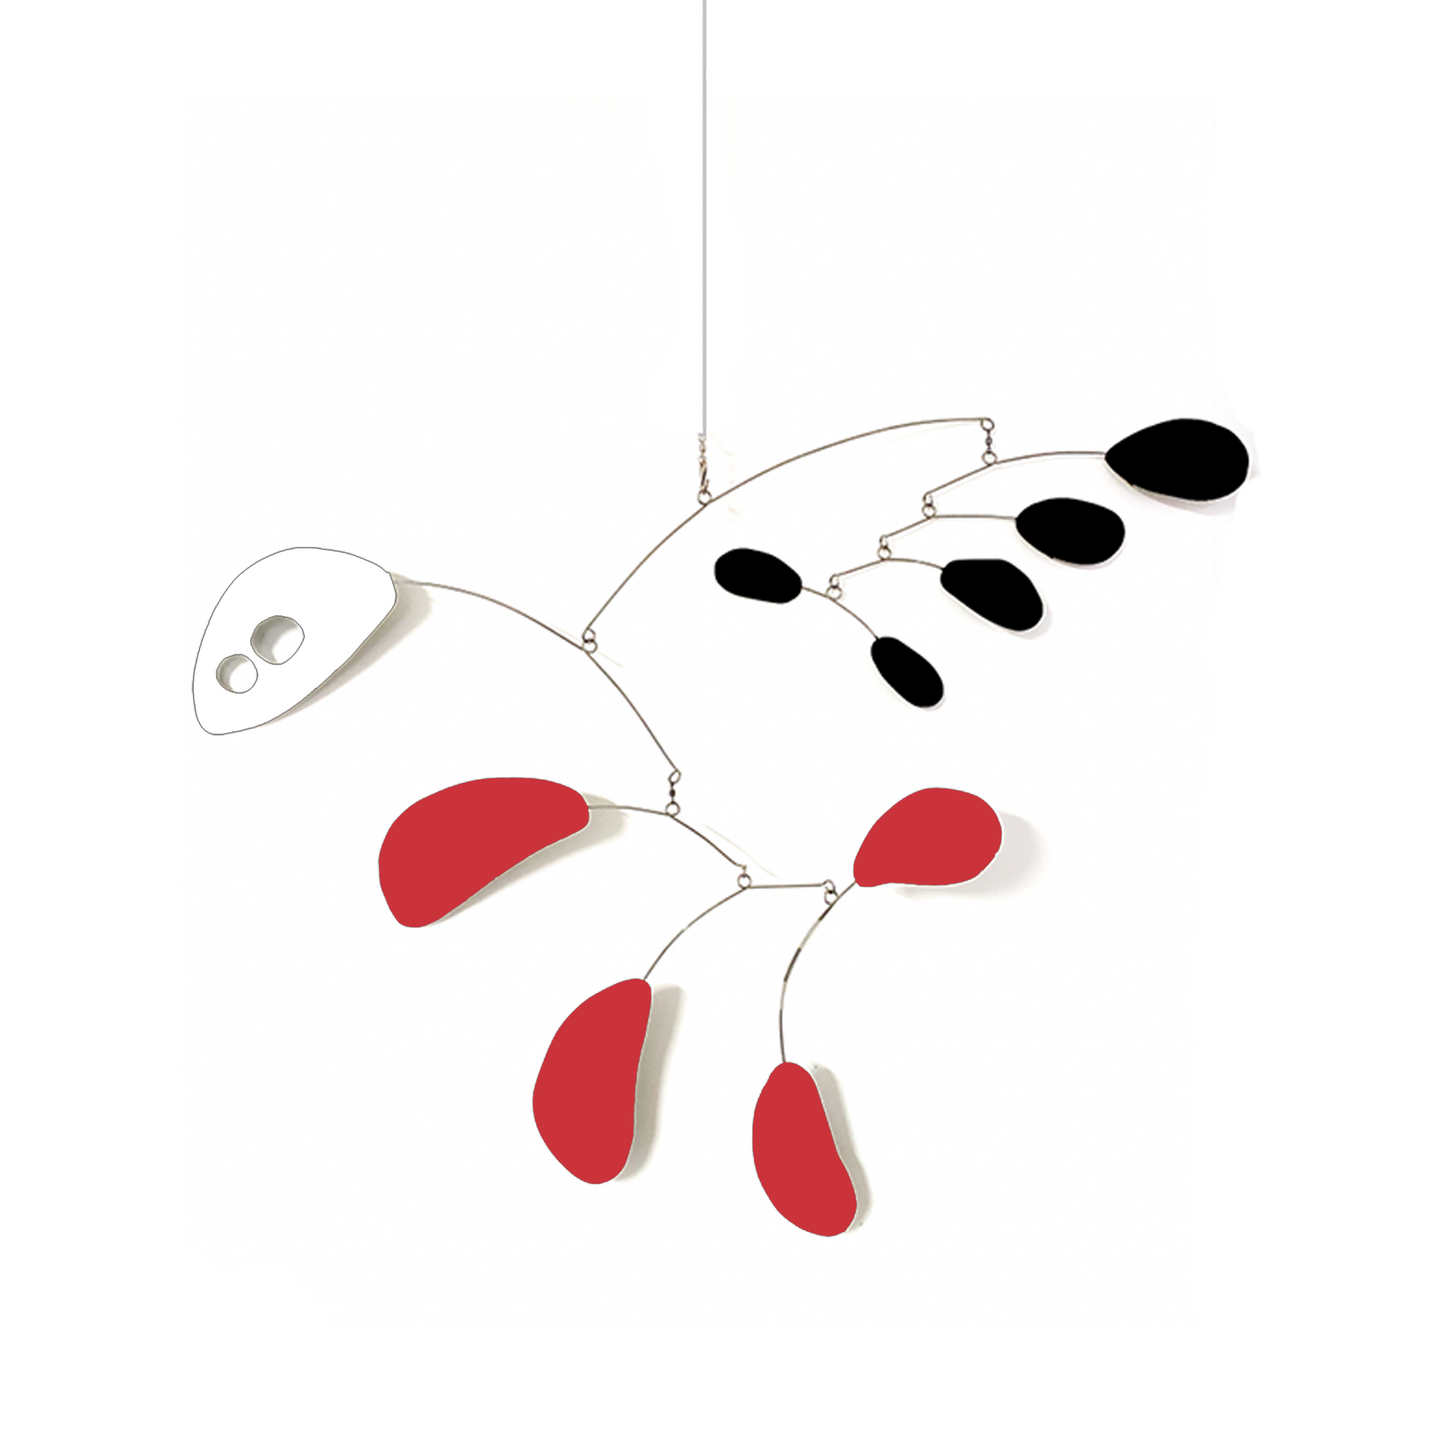 ModCat Mid Century Modern Kinetic Hanging Art Mobile in red, black, and white by AtomicMobiles.com